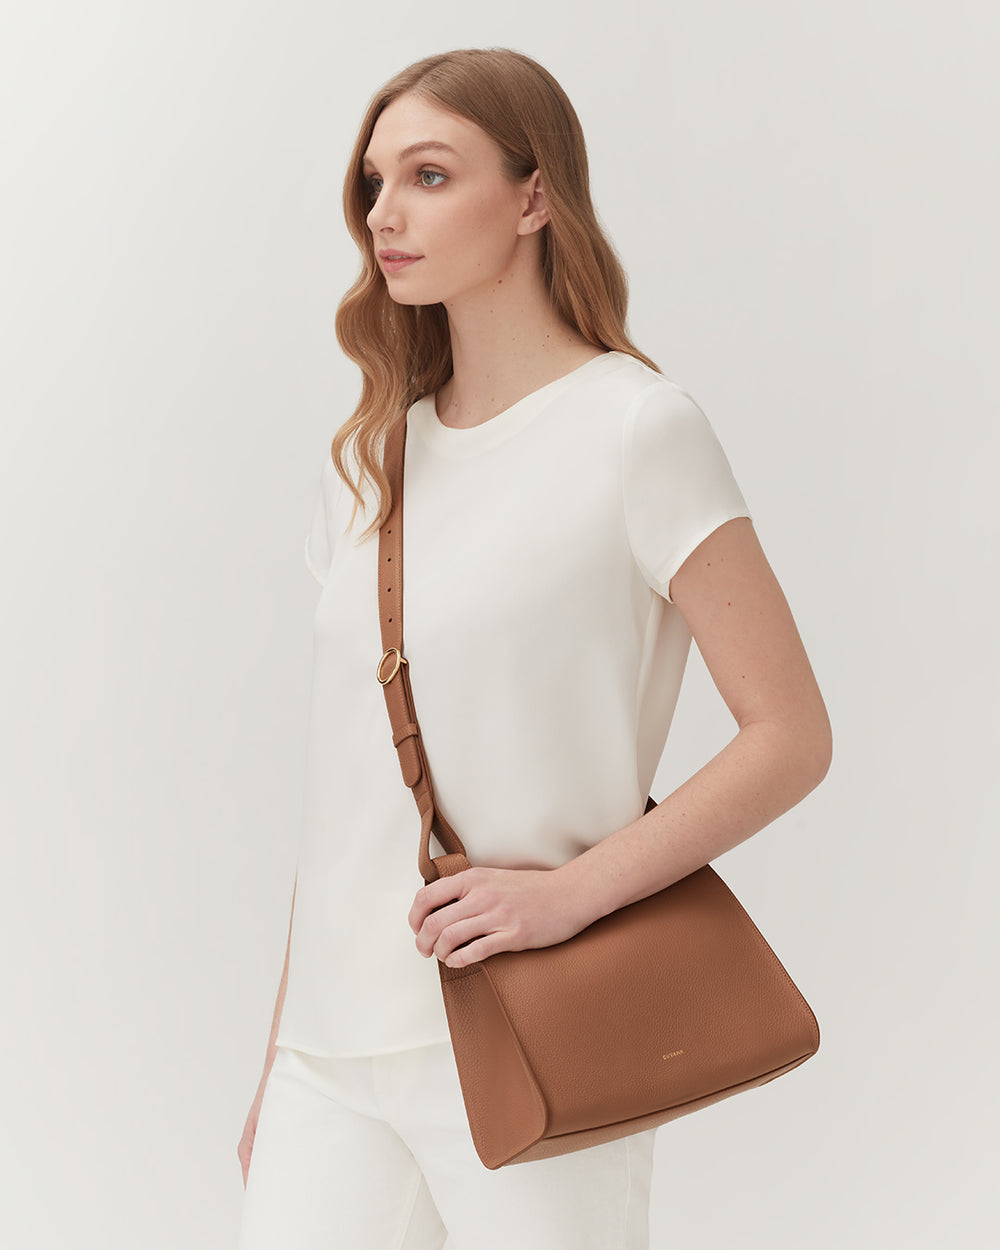 Woman standing with a shoulder bag, looking to the side.